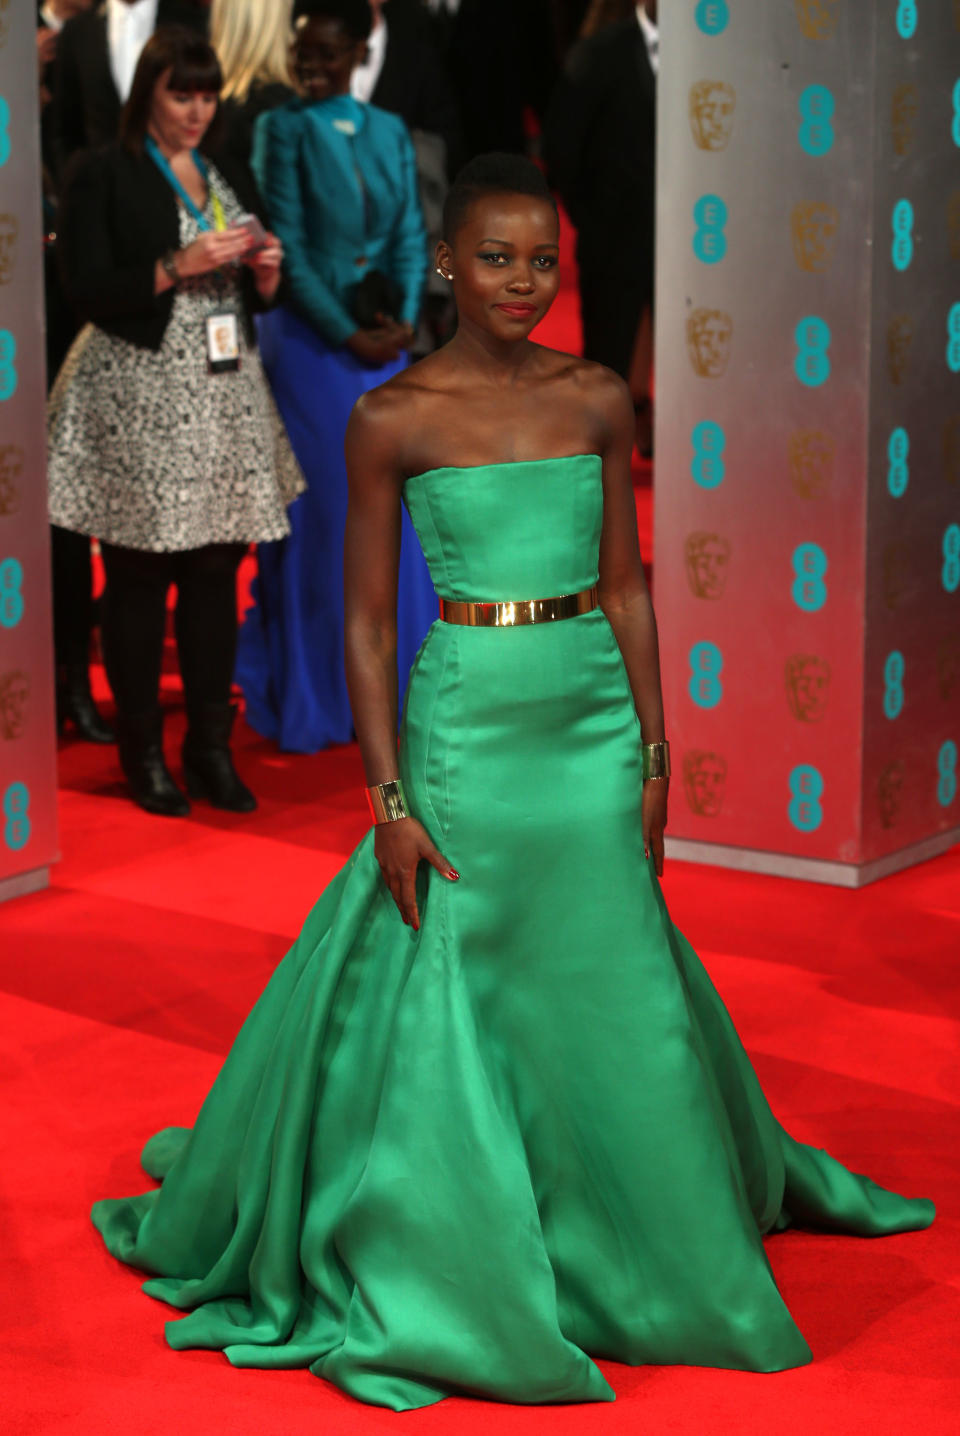 Actor Lupita Nyong'o poses for photographers on the red carpet at the EE British Academy Film Awards held at the Royal Opera House on Sunday Feb. 16, 2014, in London. (Photo by Joel Ryan/Invision/AP)